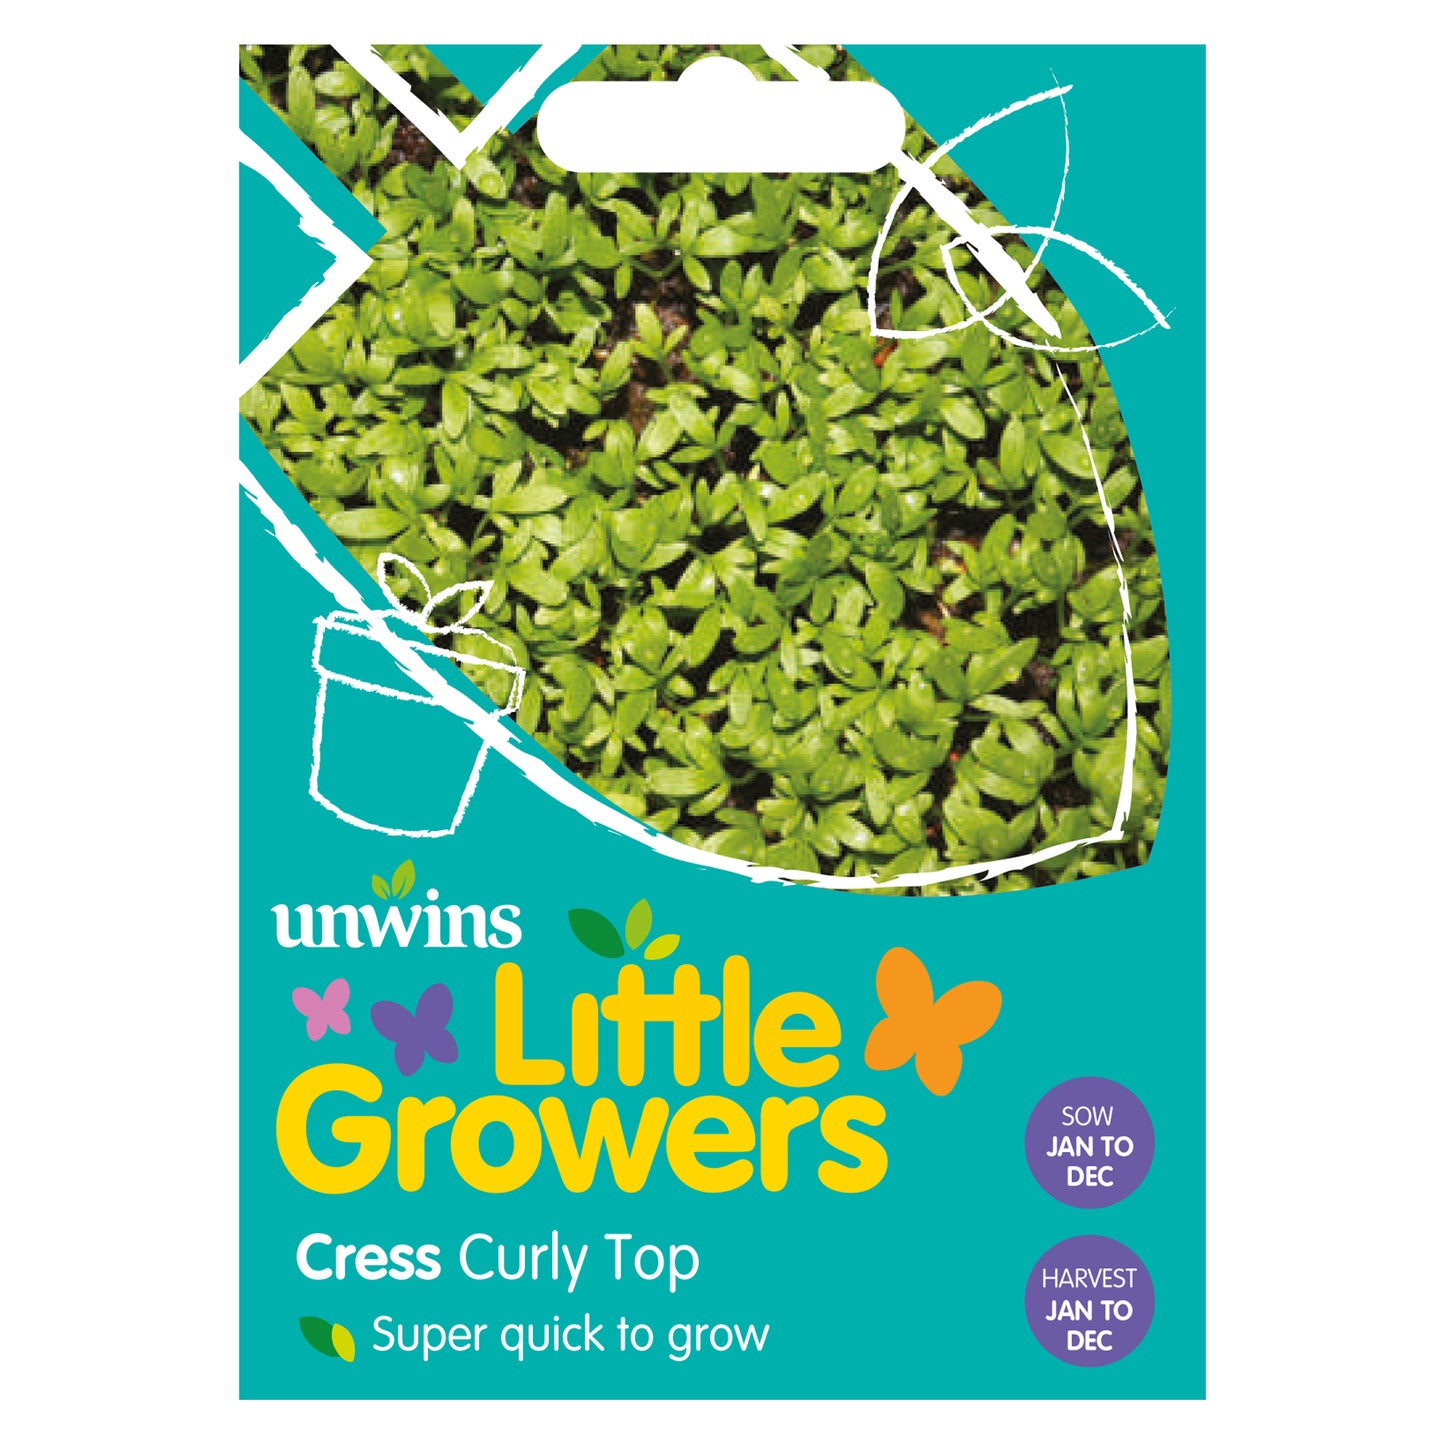 Little Growers Cress Curly Top Seeds front of pack